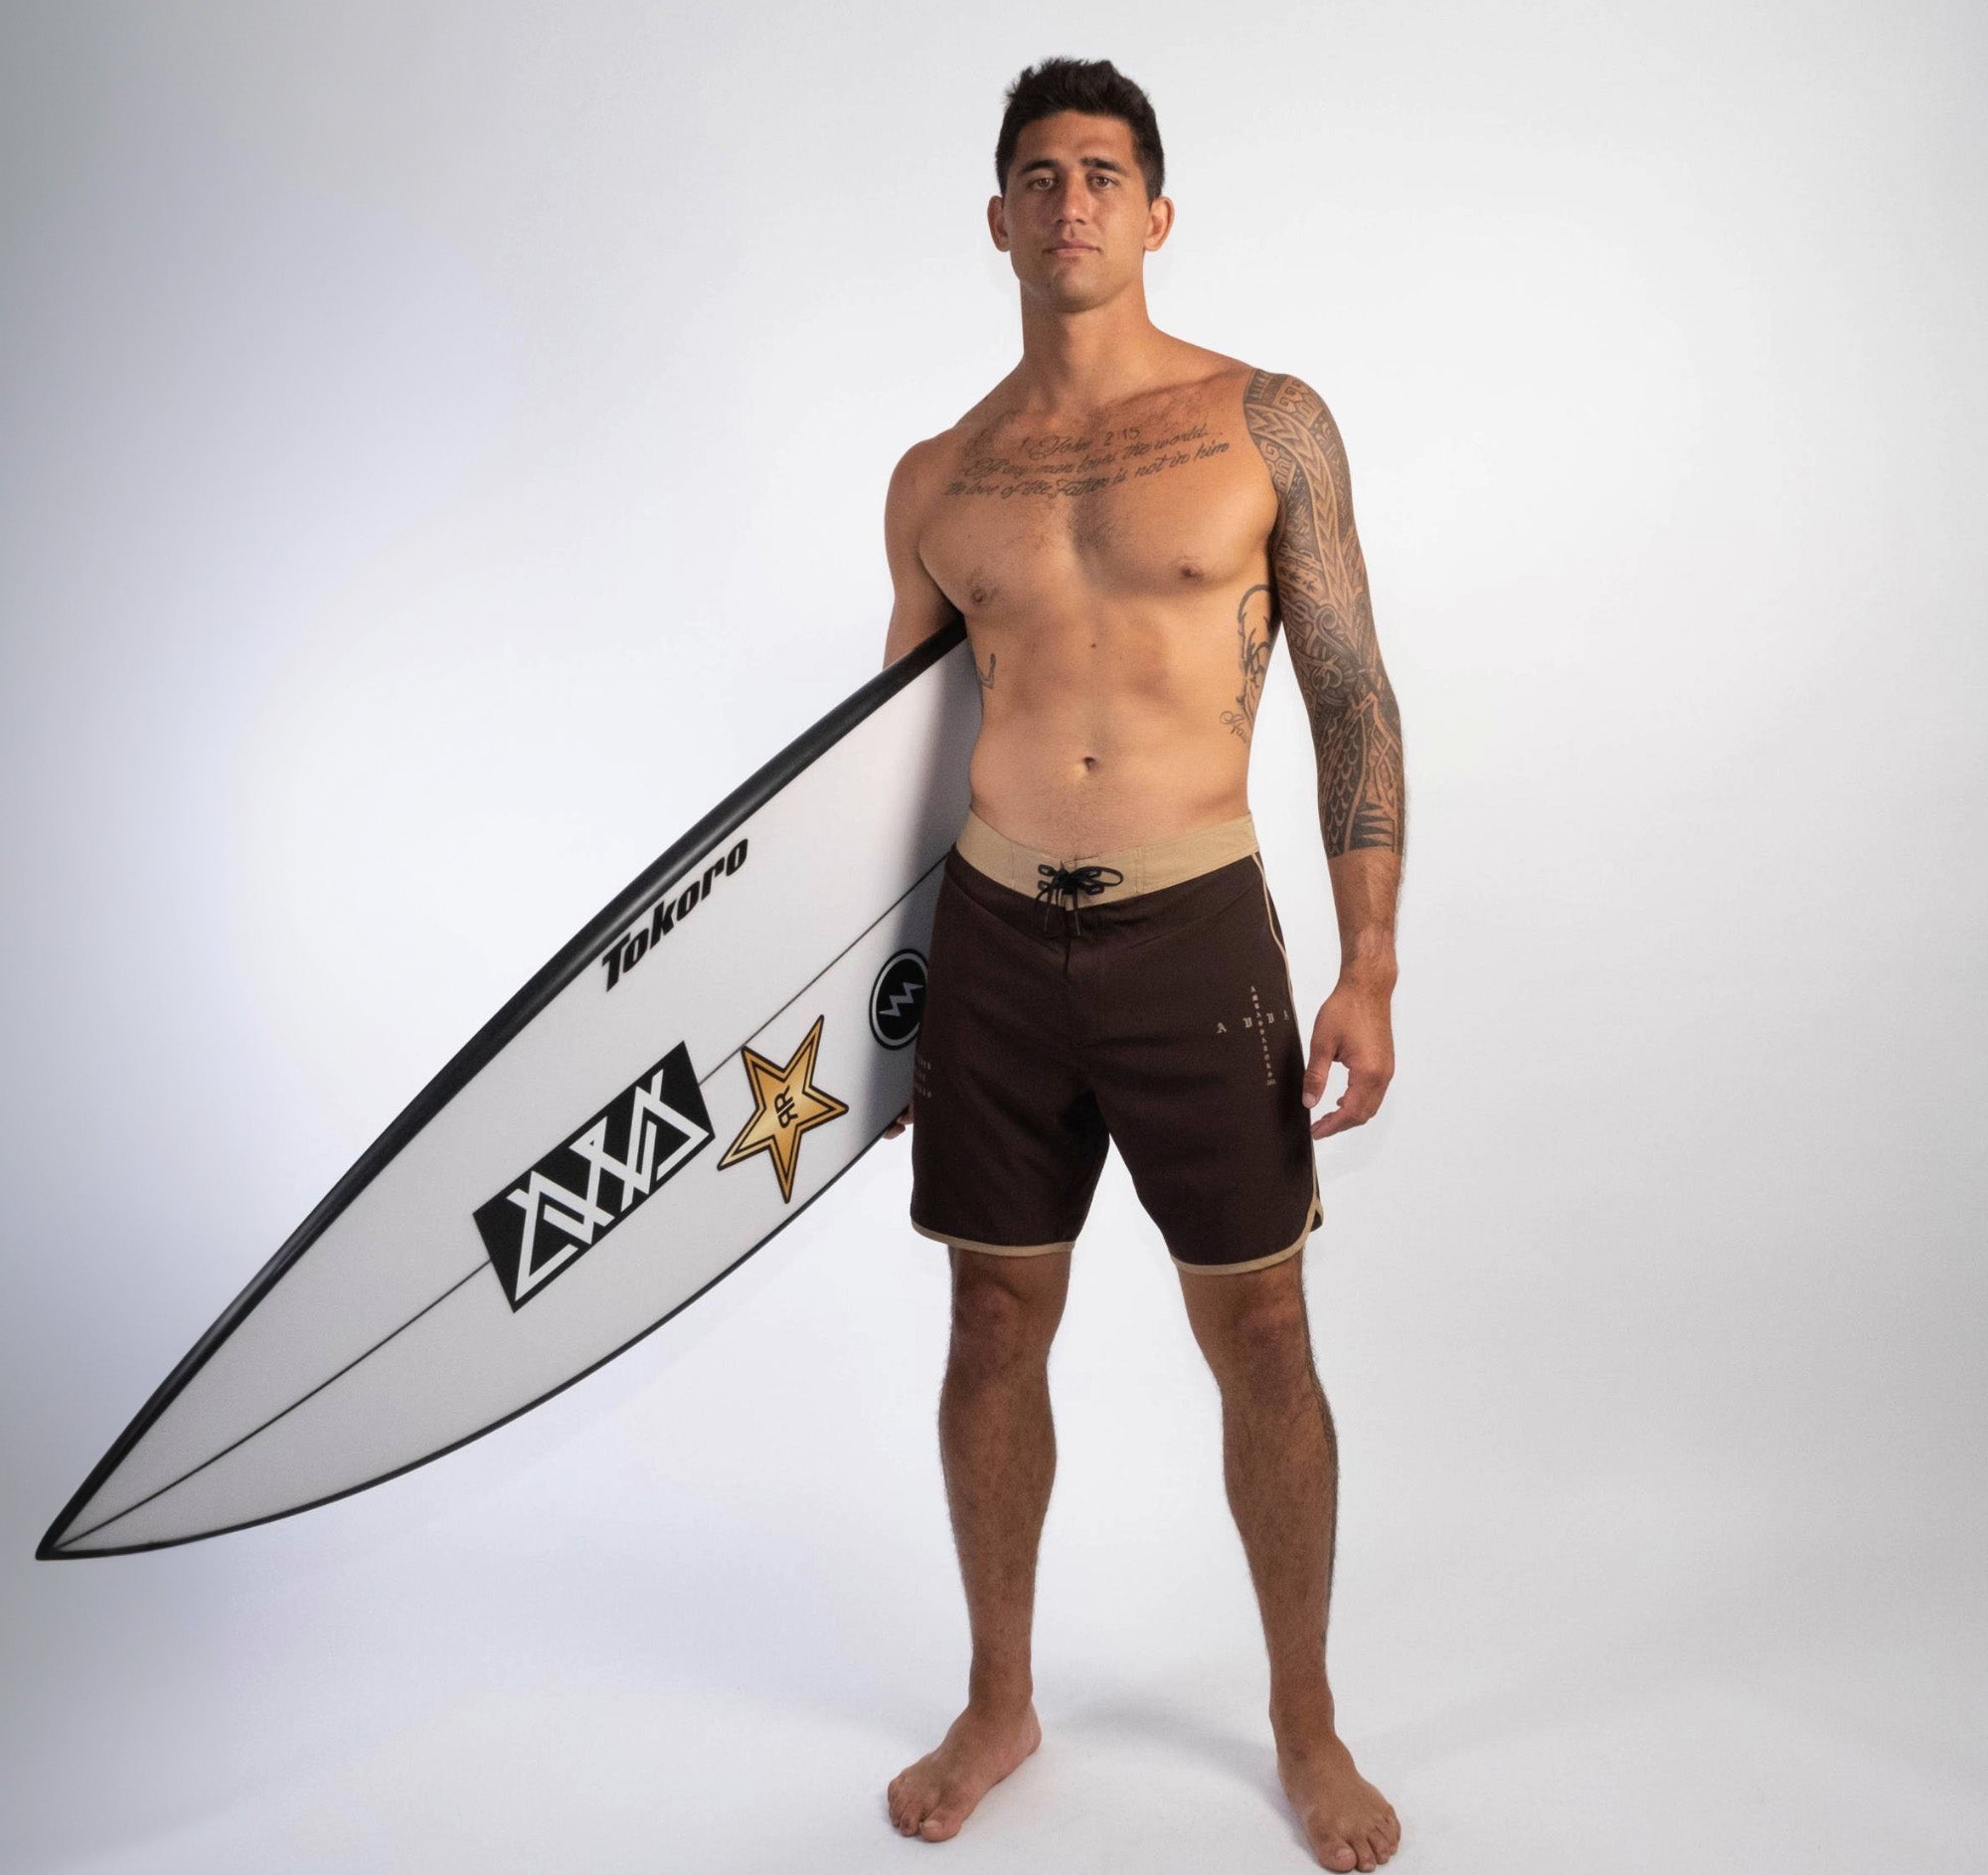 FRONT VIEW OF BROWN WEST SHORE AMBASSADOR BOARDSHORT WORN BY MODEL HOLDING A SURFBOARD.